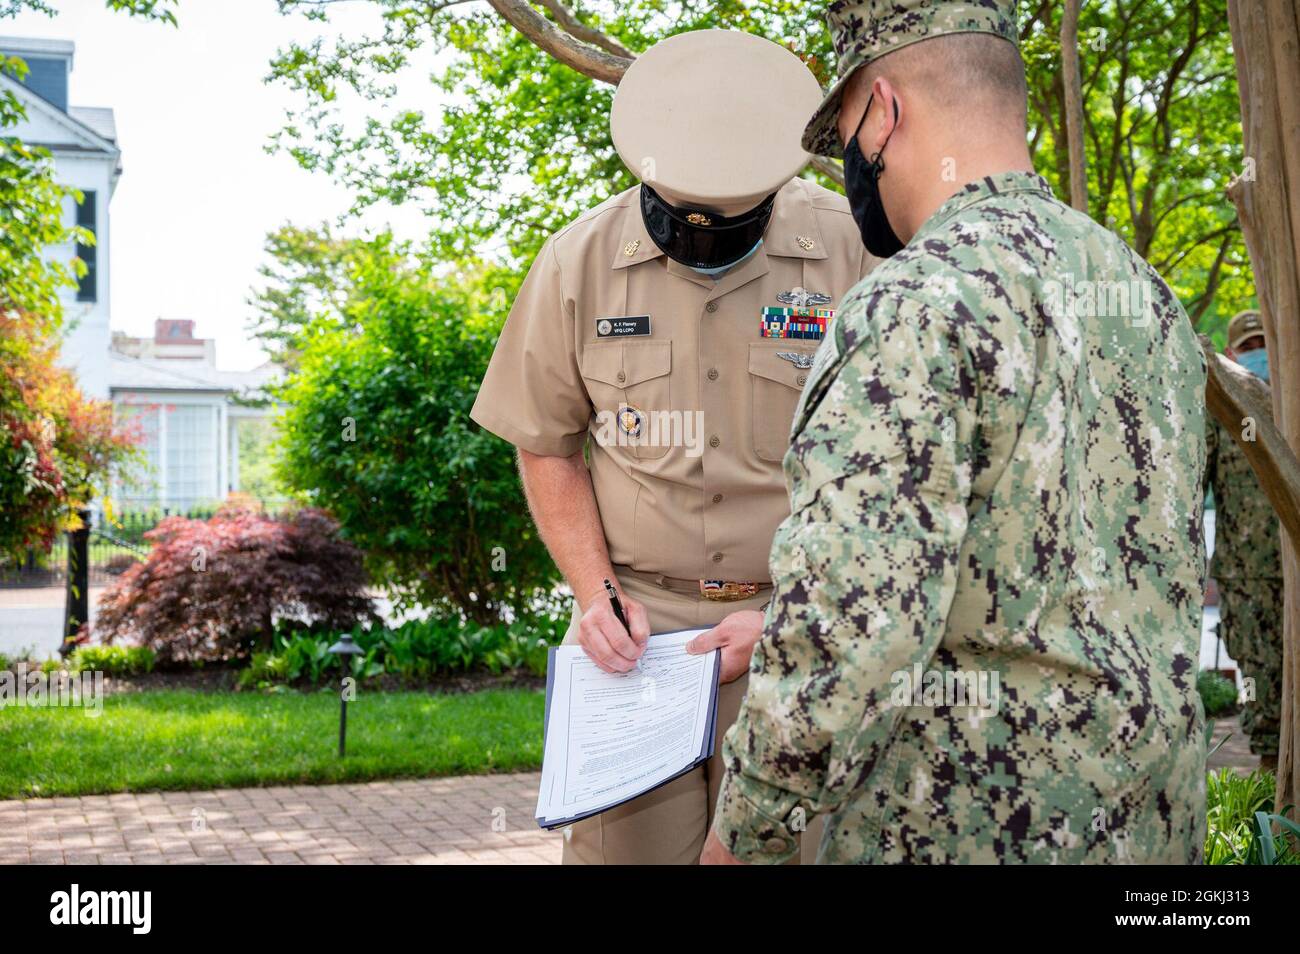 WASHINGTON, DC (April 28, 2021) – Senior Chief Culinary Specialist Korhy Flanary signs paperwork following a reenlistment ceremony held onboard Washington Navy Yard. Stock Photo